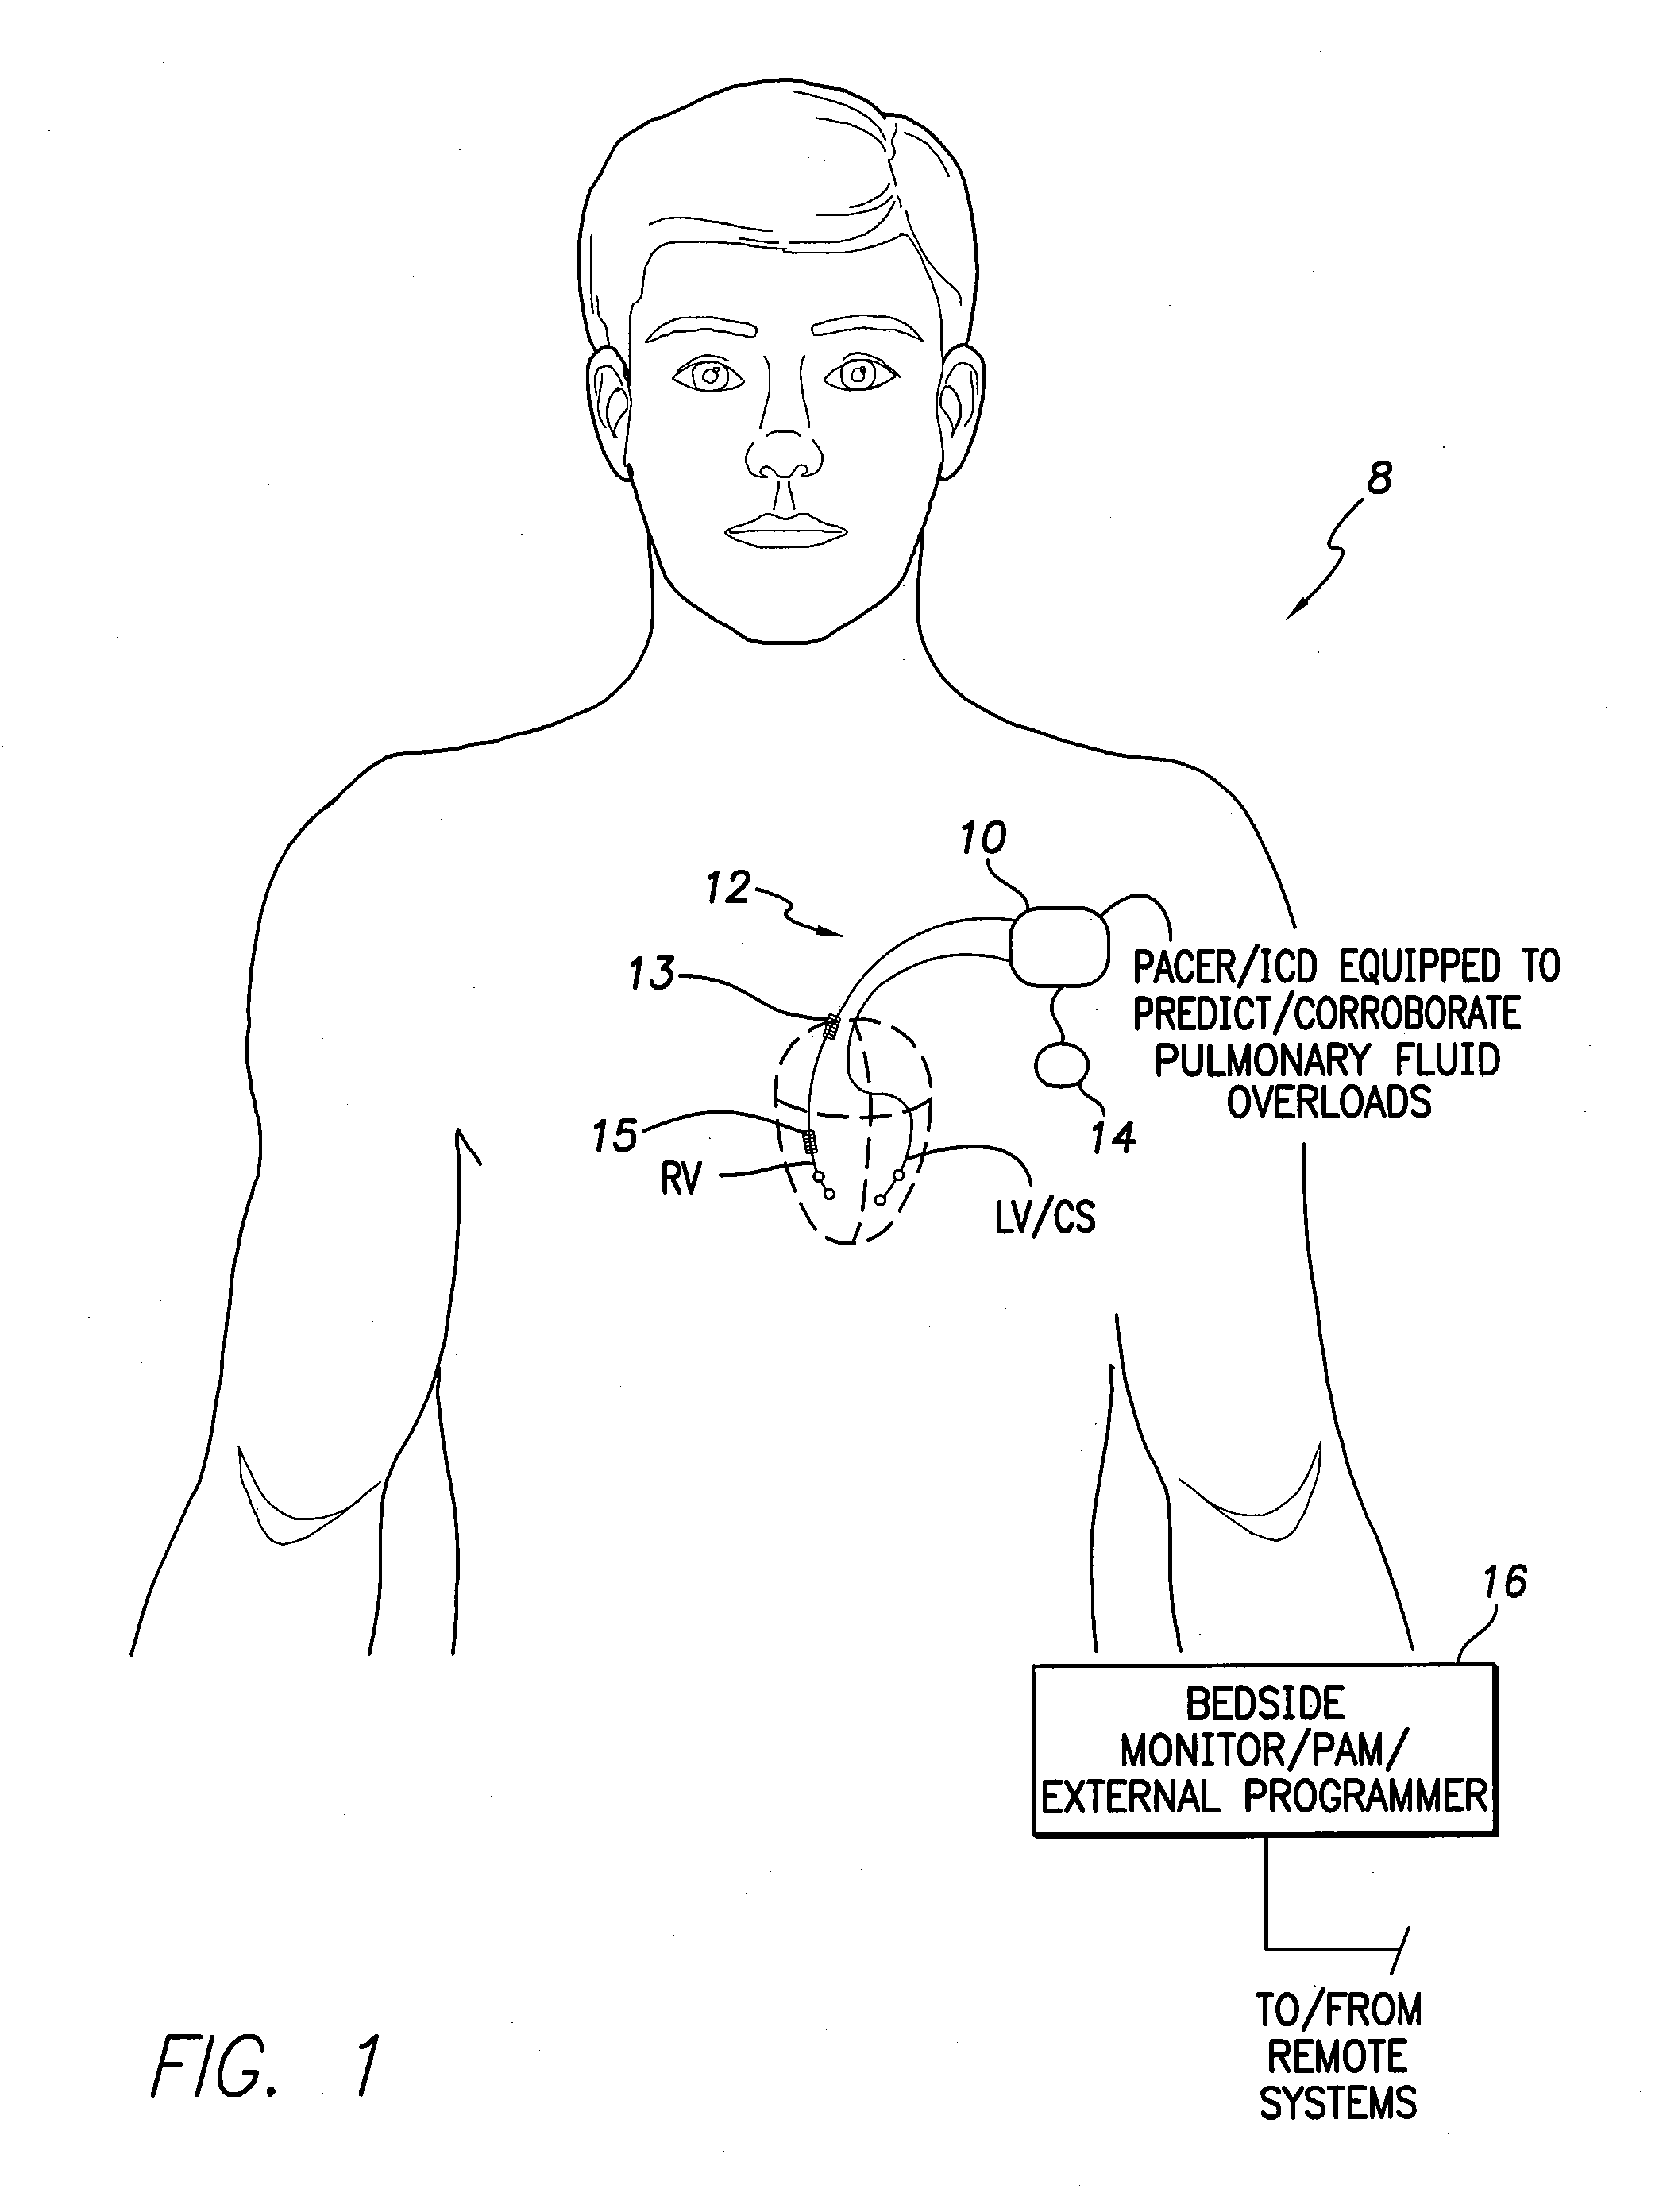 Systems and methods for predicting and corroborating pulmonary fluid overloads using an implantable medical device